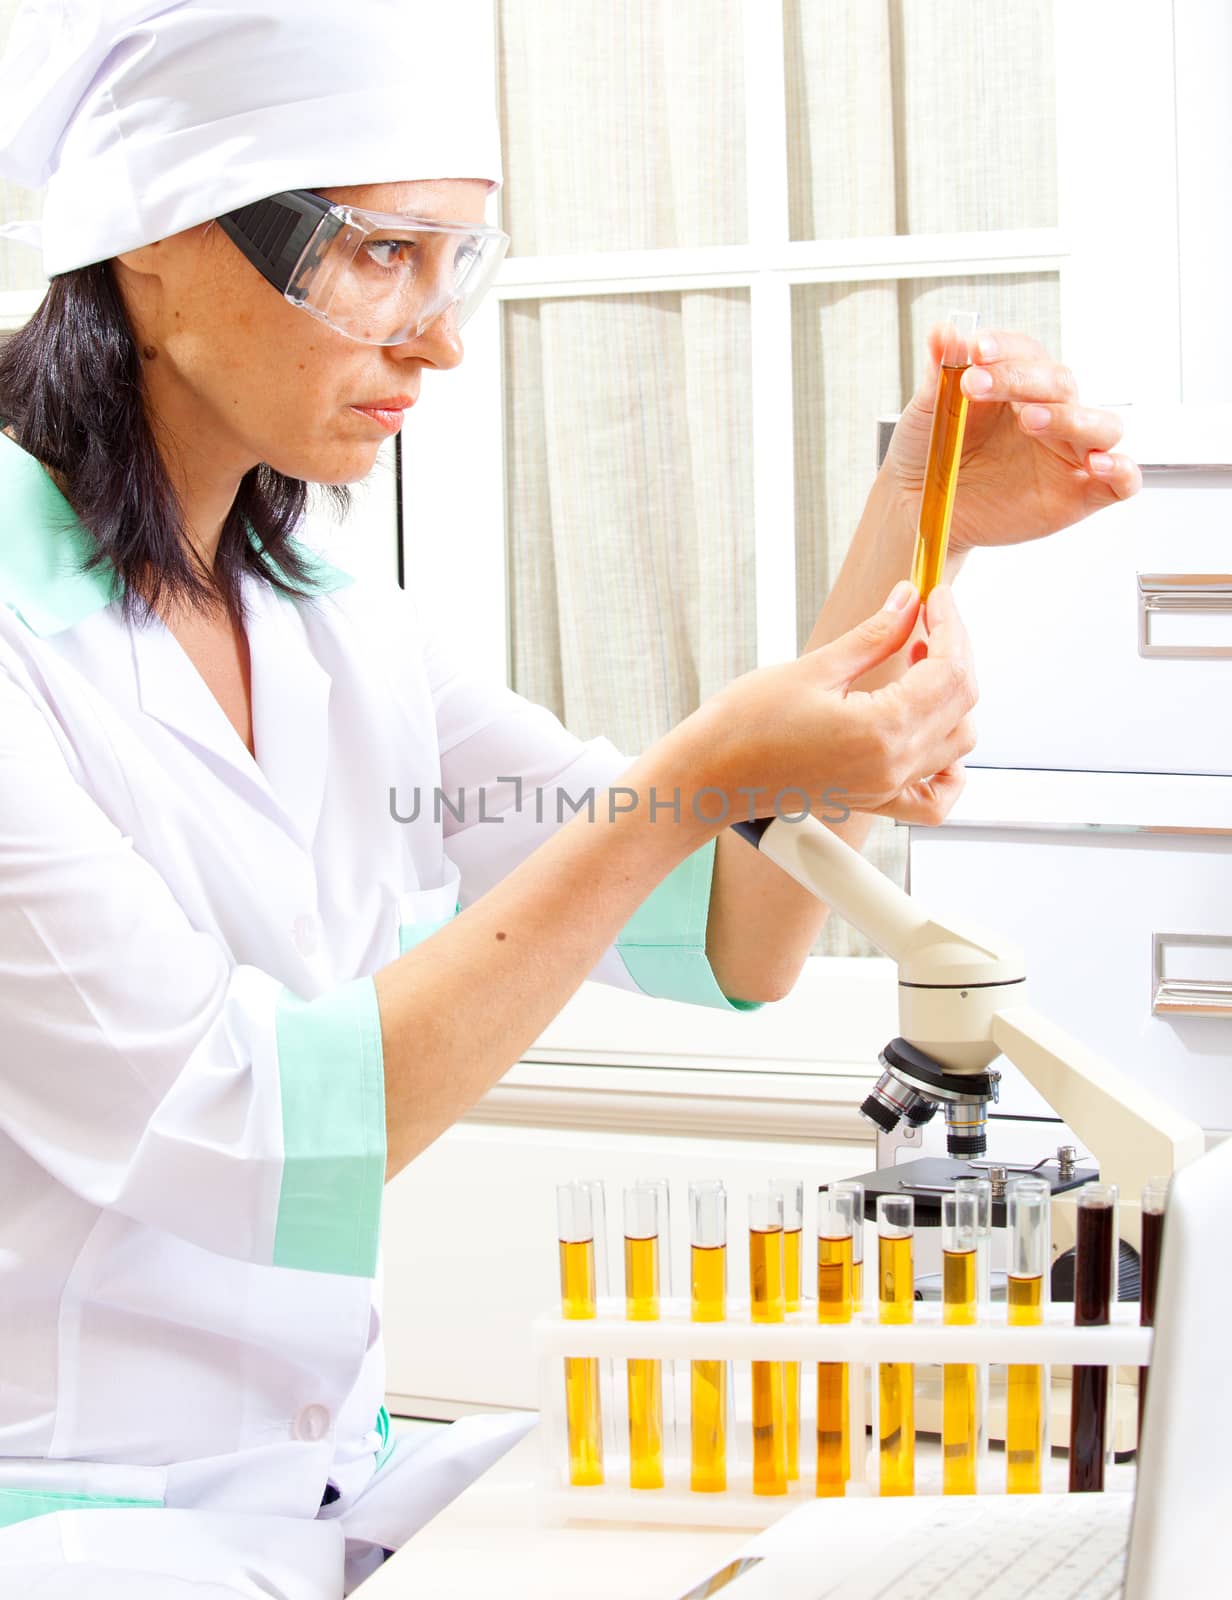 female scientist considering the sample tube in the life science research laboratory: biochemistry, genetics, forensics, microbiology